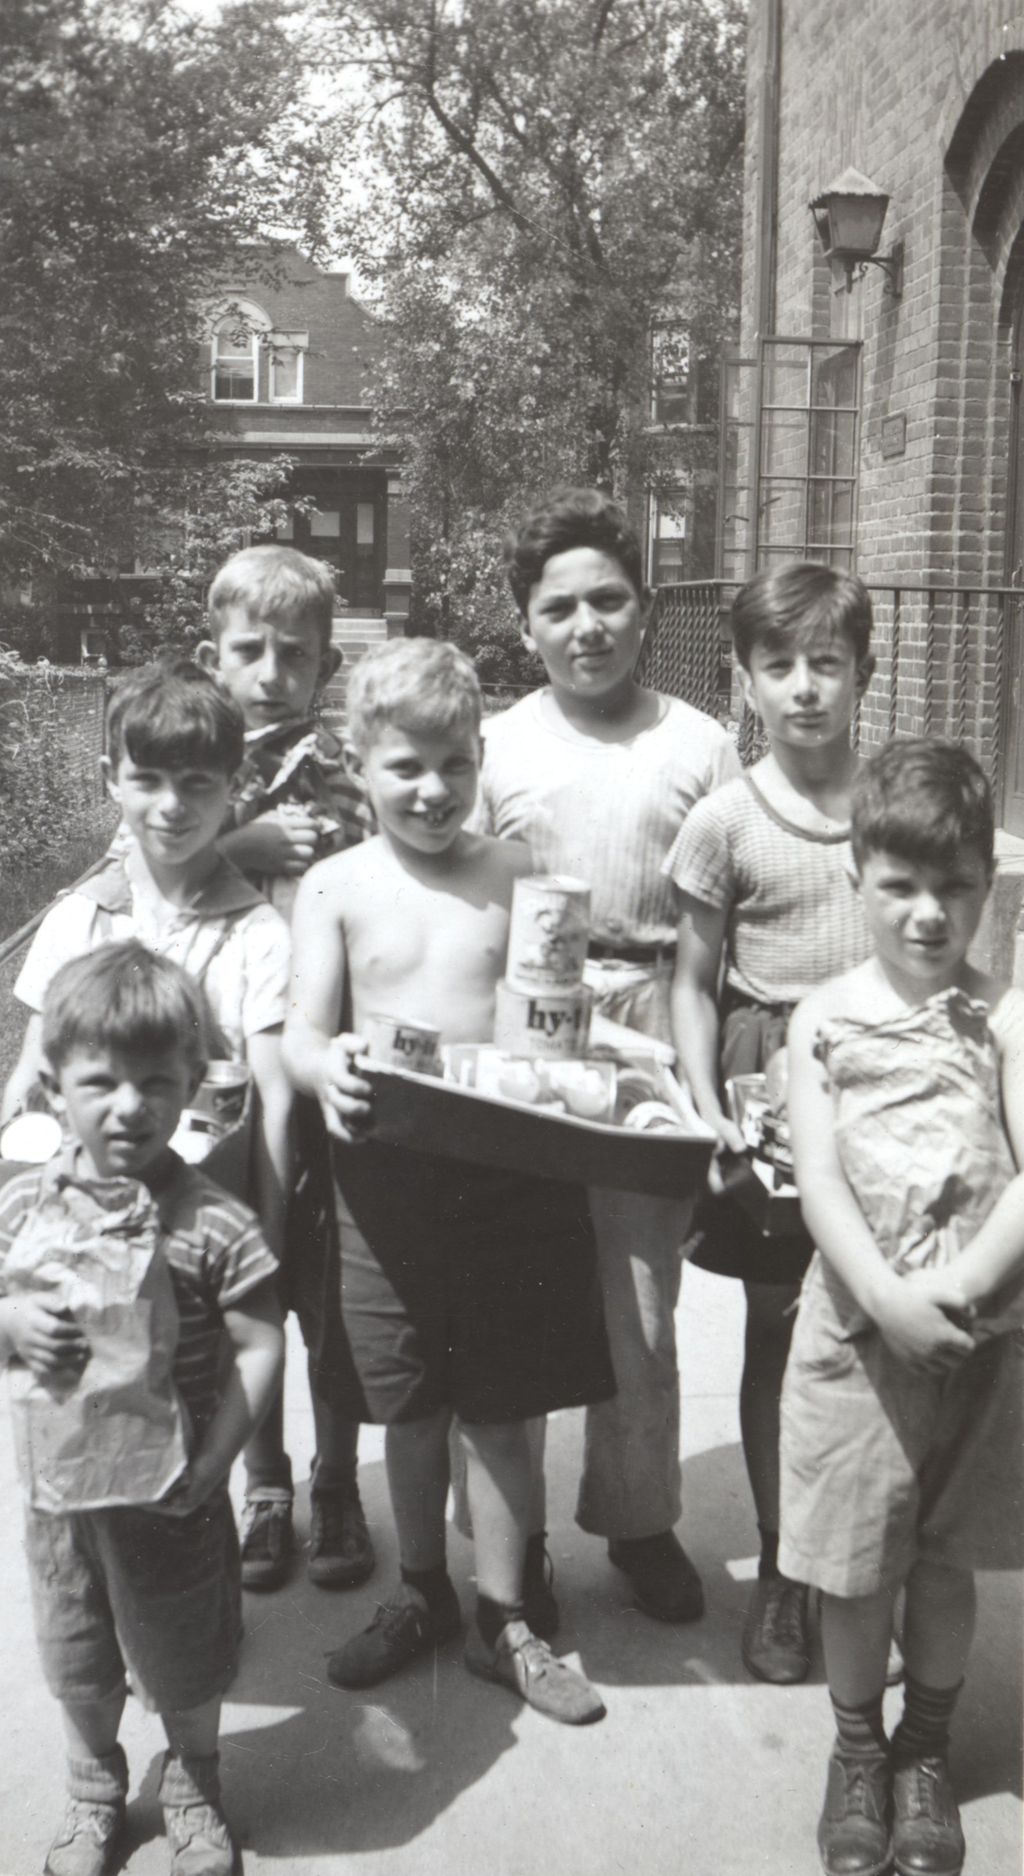 Boys outside Marcy Center with tin cans for salvage drive